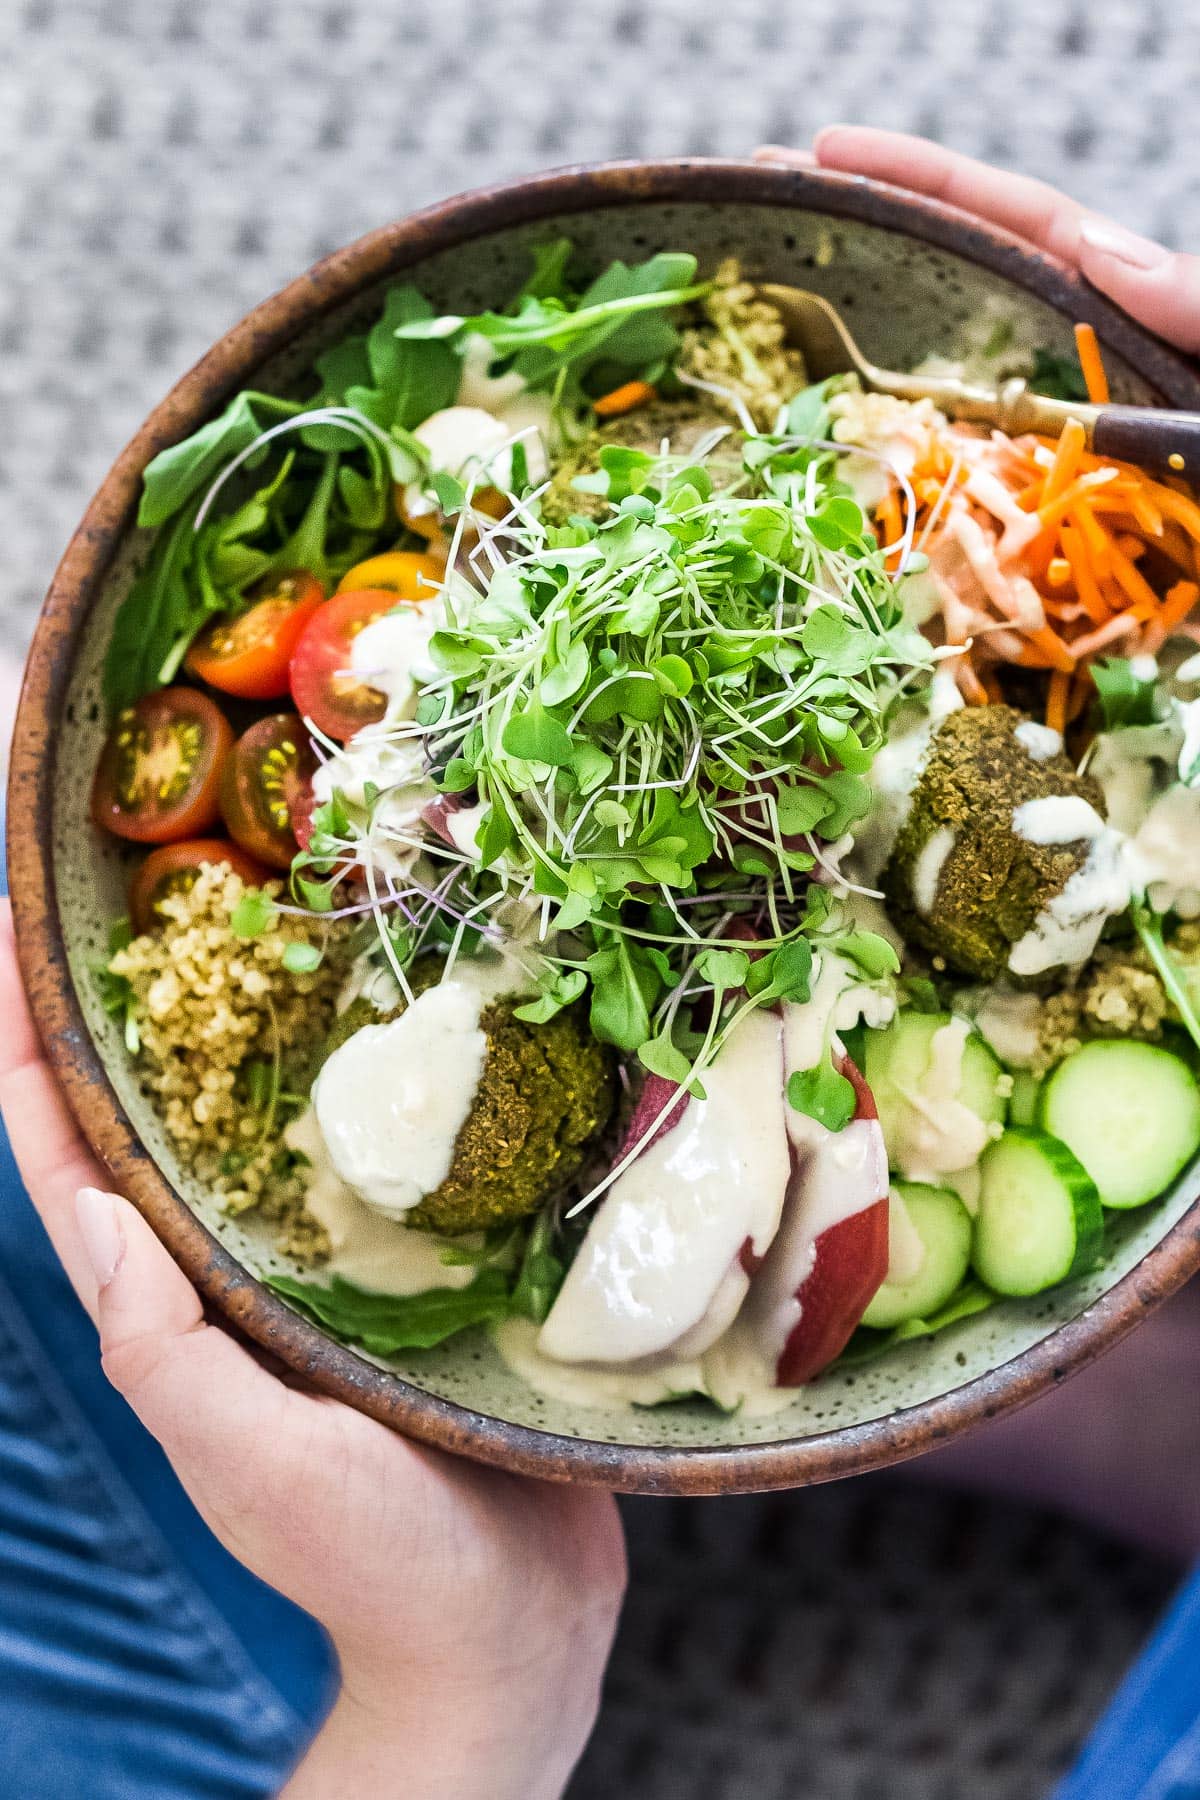 Falafel bowl with baked falafels, quinoa, lots of healthy veggies, olives, herbs and drizzled with tahini sauce.